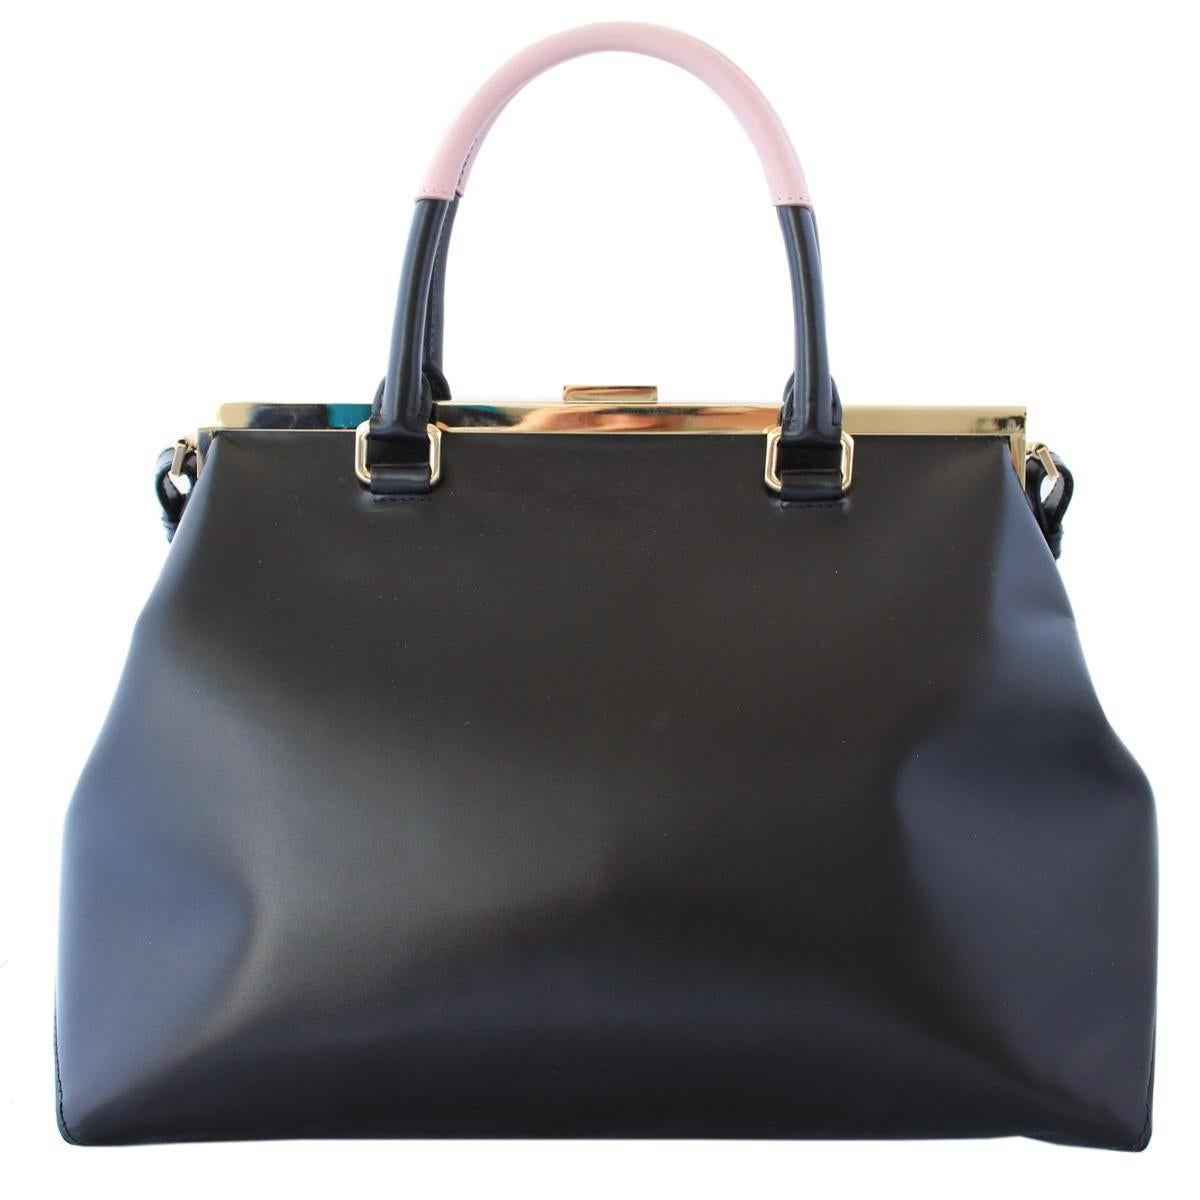 Wonderful Jil Sander tote bag
Leather
Black color
Rose antique handles
Usable as shoulder bag too
Three internal pockets 
Golden metal inserts
Trapeze shape
Cm 34 x 25 x 18 (13.3 x 9.8 x 7 inches)
With dustbag
Worldwide express shipping included in